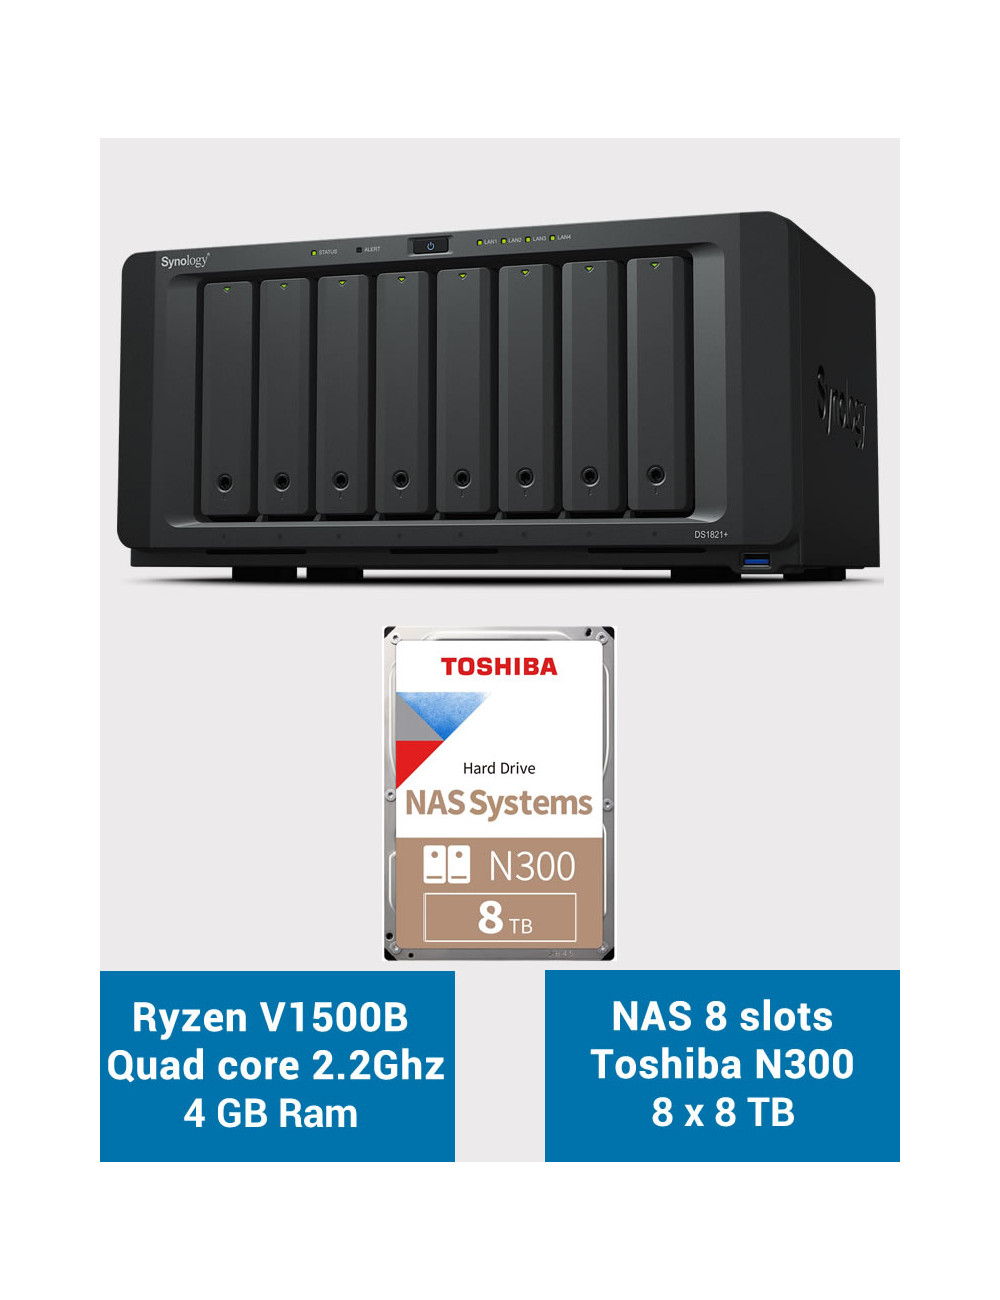 Synology DS1821+ Serveur NAS 8 baies Toshiba N300 64To (8x8To)